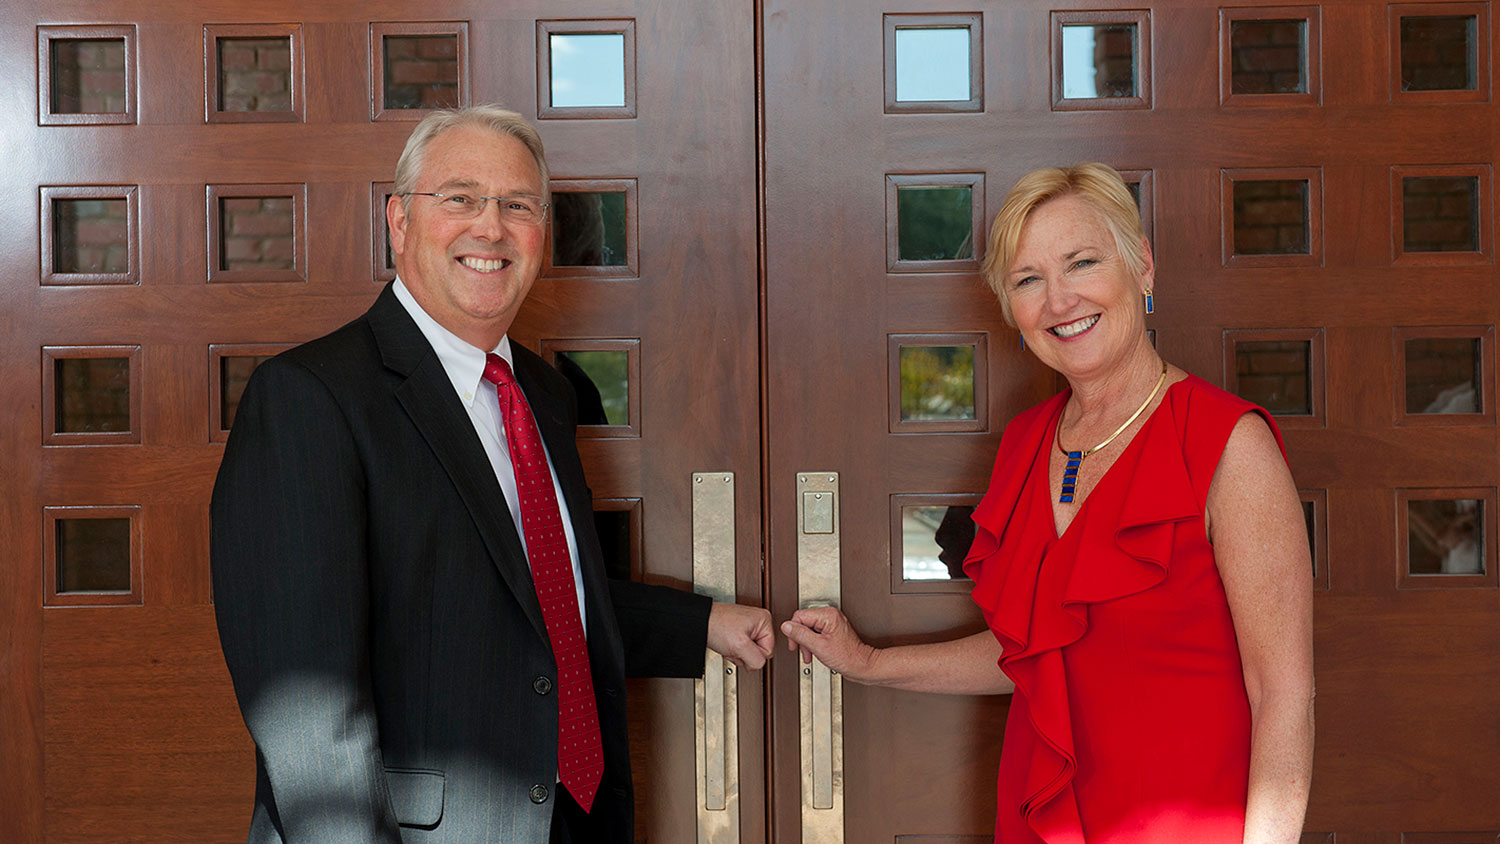 NC State Chancellor Randy Woodson and his wife Susan